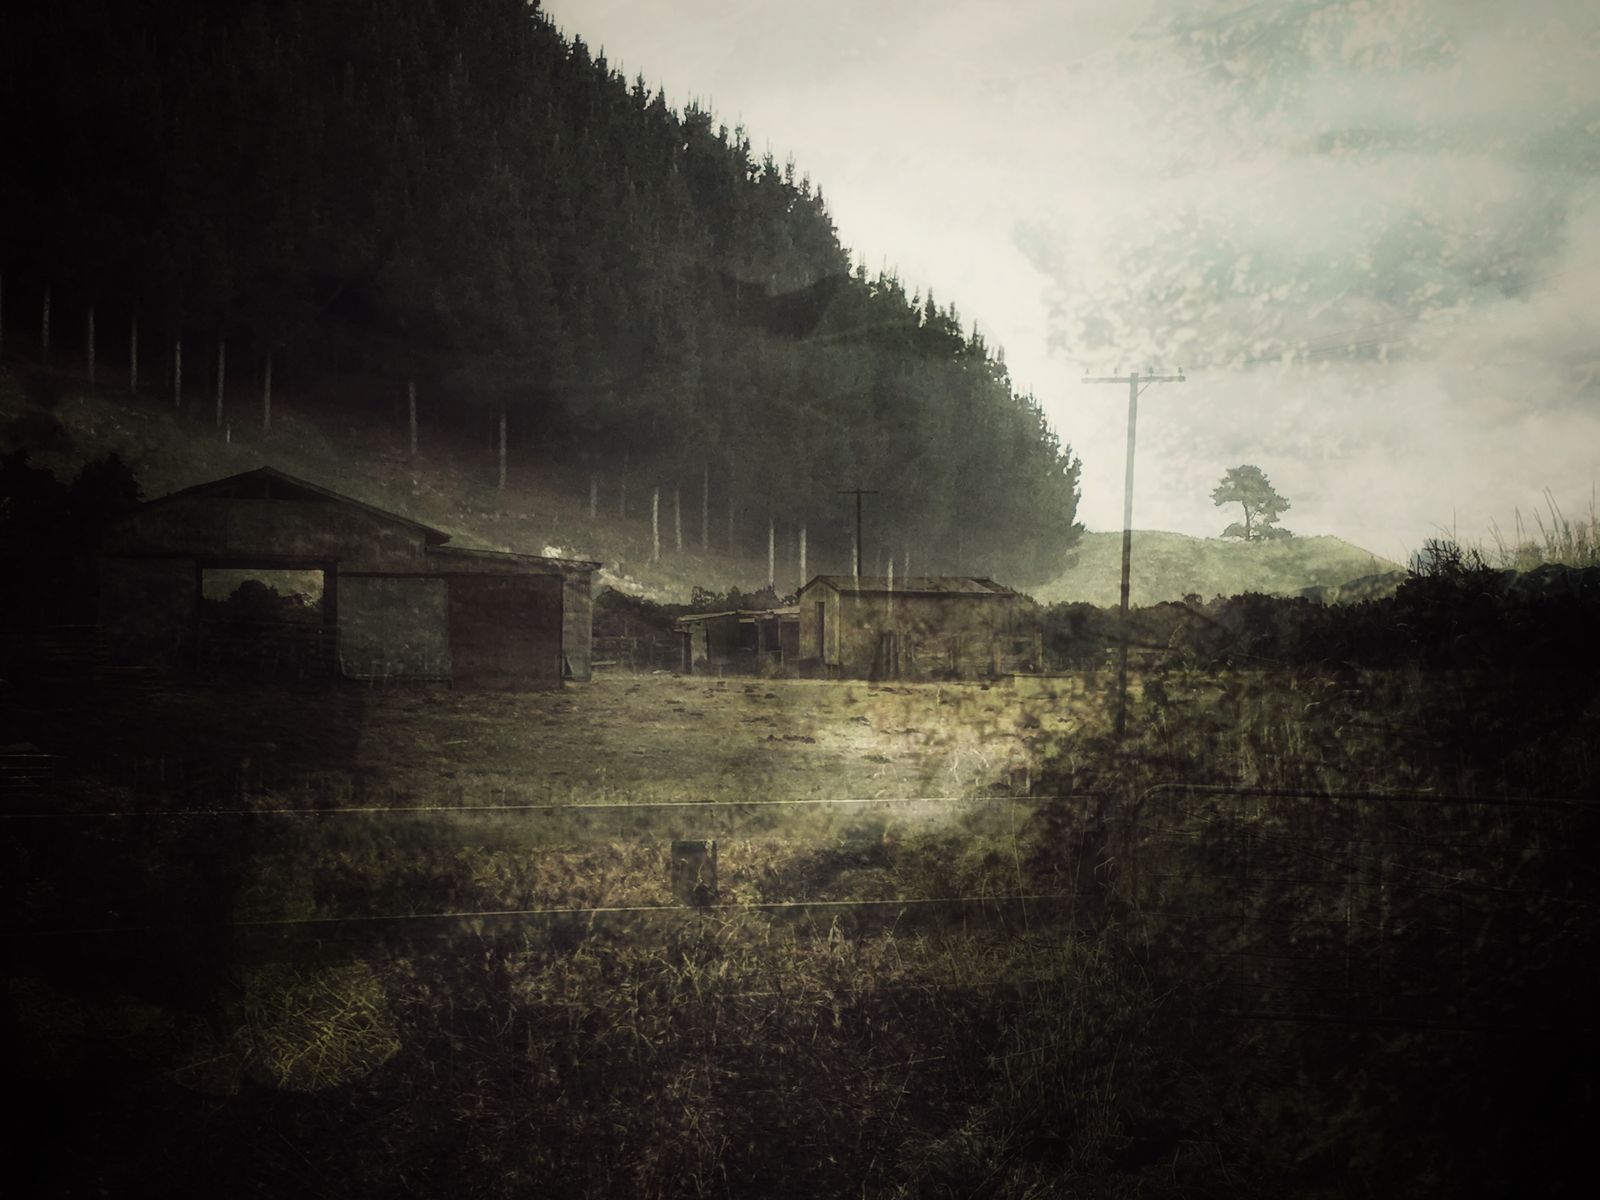 © Stefanie Young - Image from the Fictional Landscapes photography project